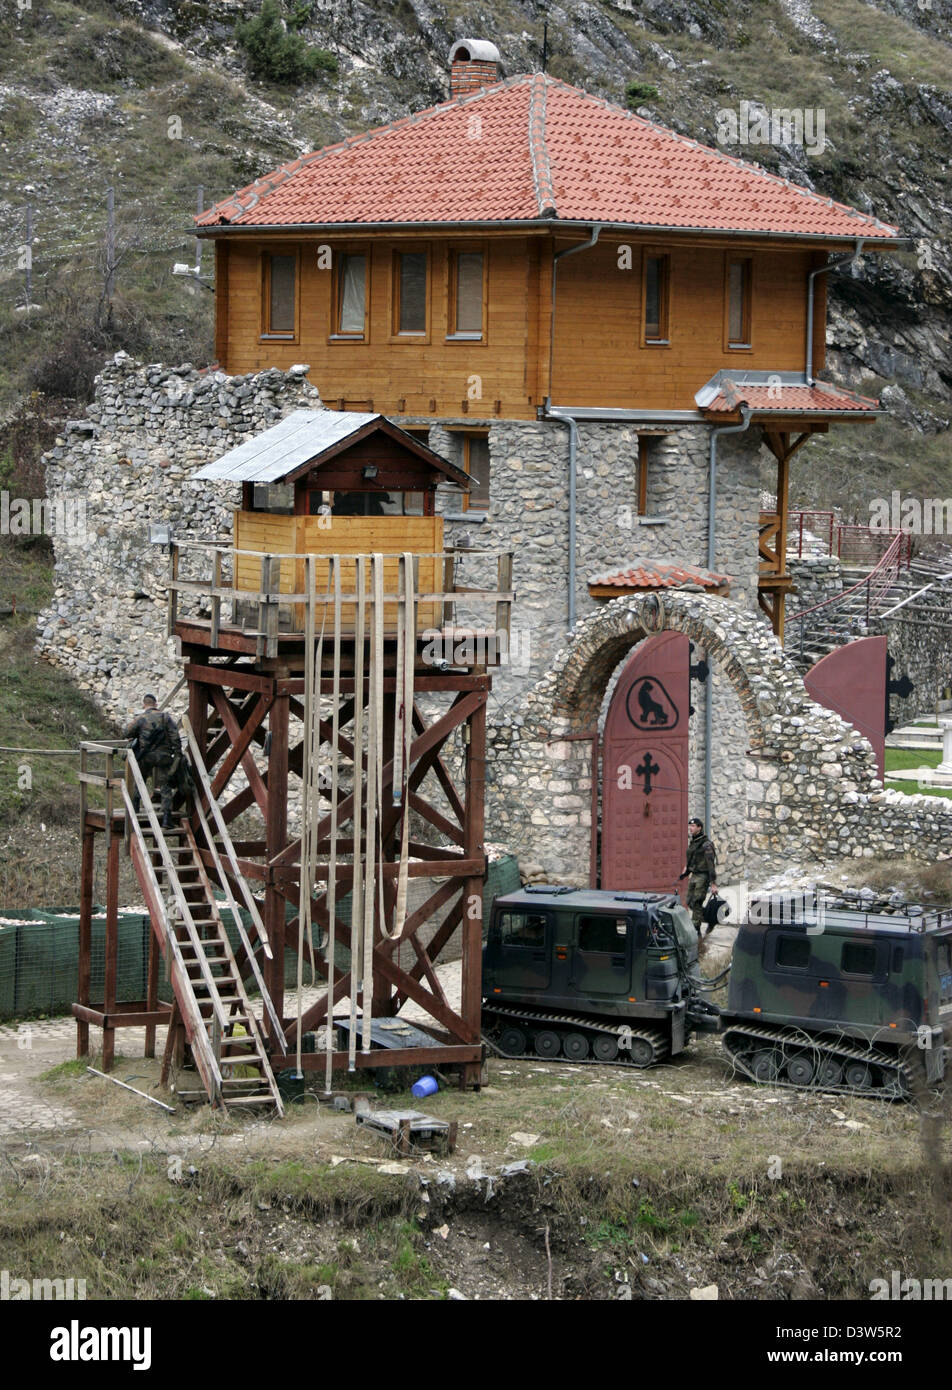 The Archangel Monastery is guarded by the German Bundeswehr in Prizren, Kosovo, 11 December 2006. The monastery is located at the Prizrenska Bistrica river valley in the southern part of Kosovo. South of the valley crowns the 2,000 metres high Sar Planina mountains to form a natural border between Serbia and Montenegro. The monastery sanctified to the archangels Michael and Gabriel Stock Photo